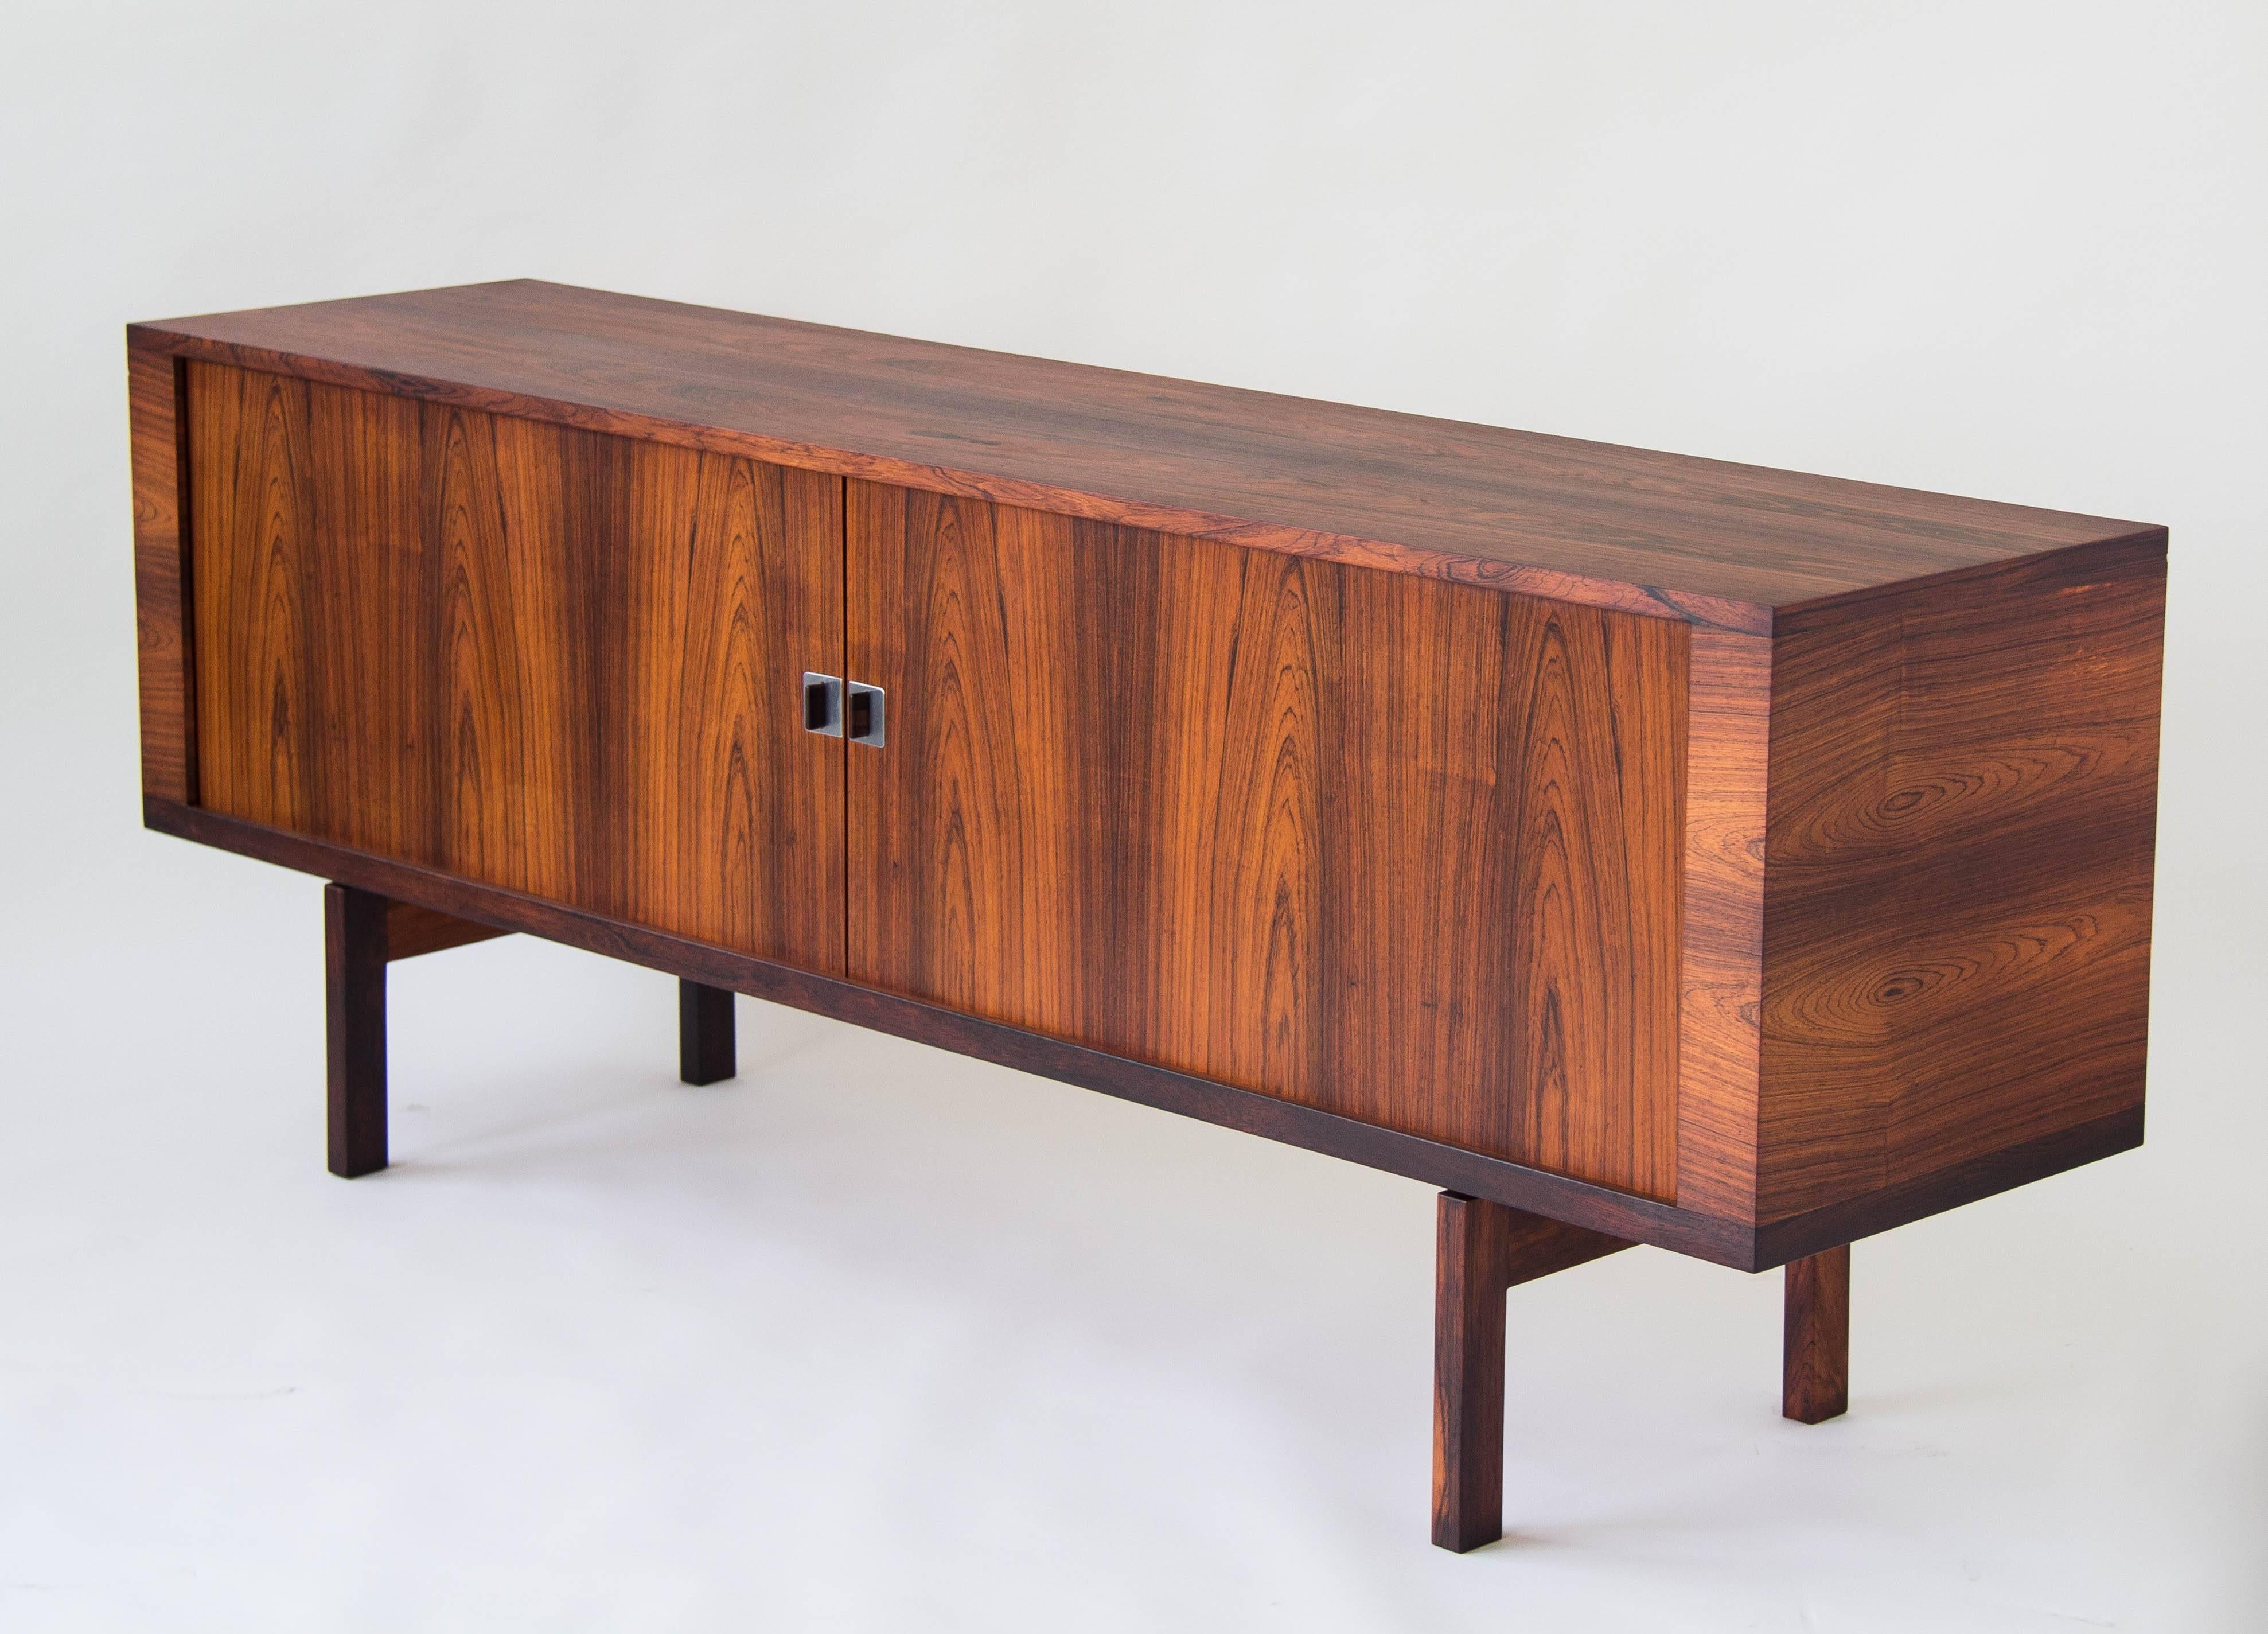 A rosewood credenza with stunning grain, designed by Hans J. Wegner for Ry Mobler. The piece has tambour doors with rosewood pulls mounted on square plates of polished steel. The interior is finished entirely in soaped oak, with each outer